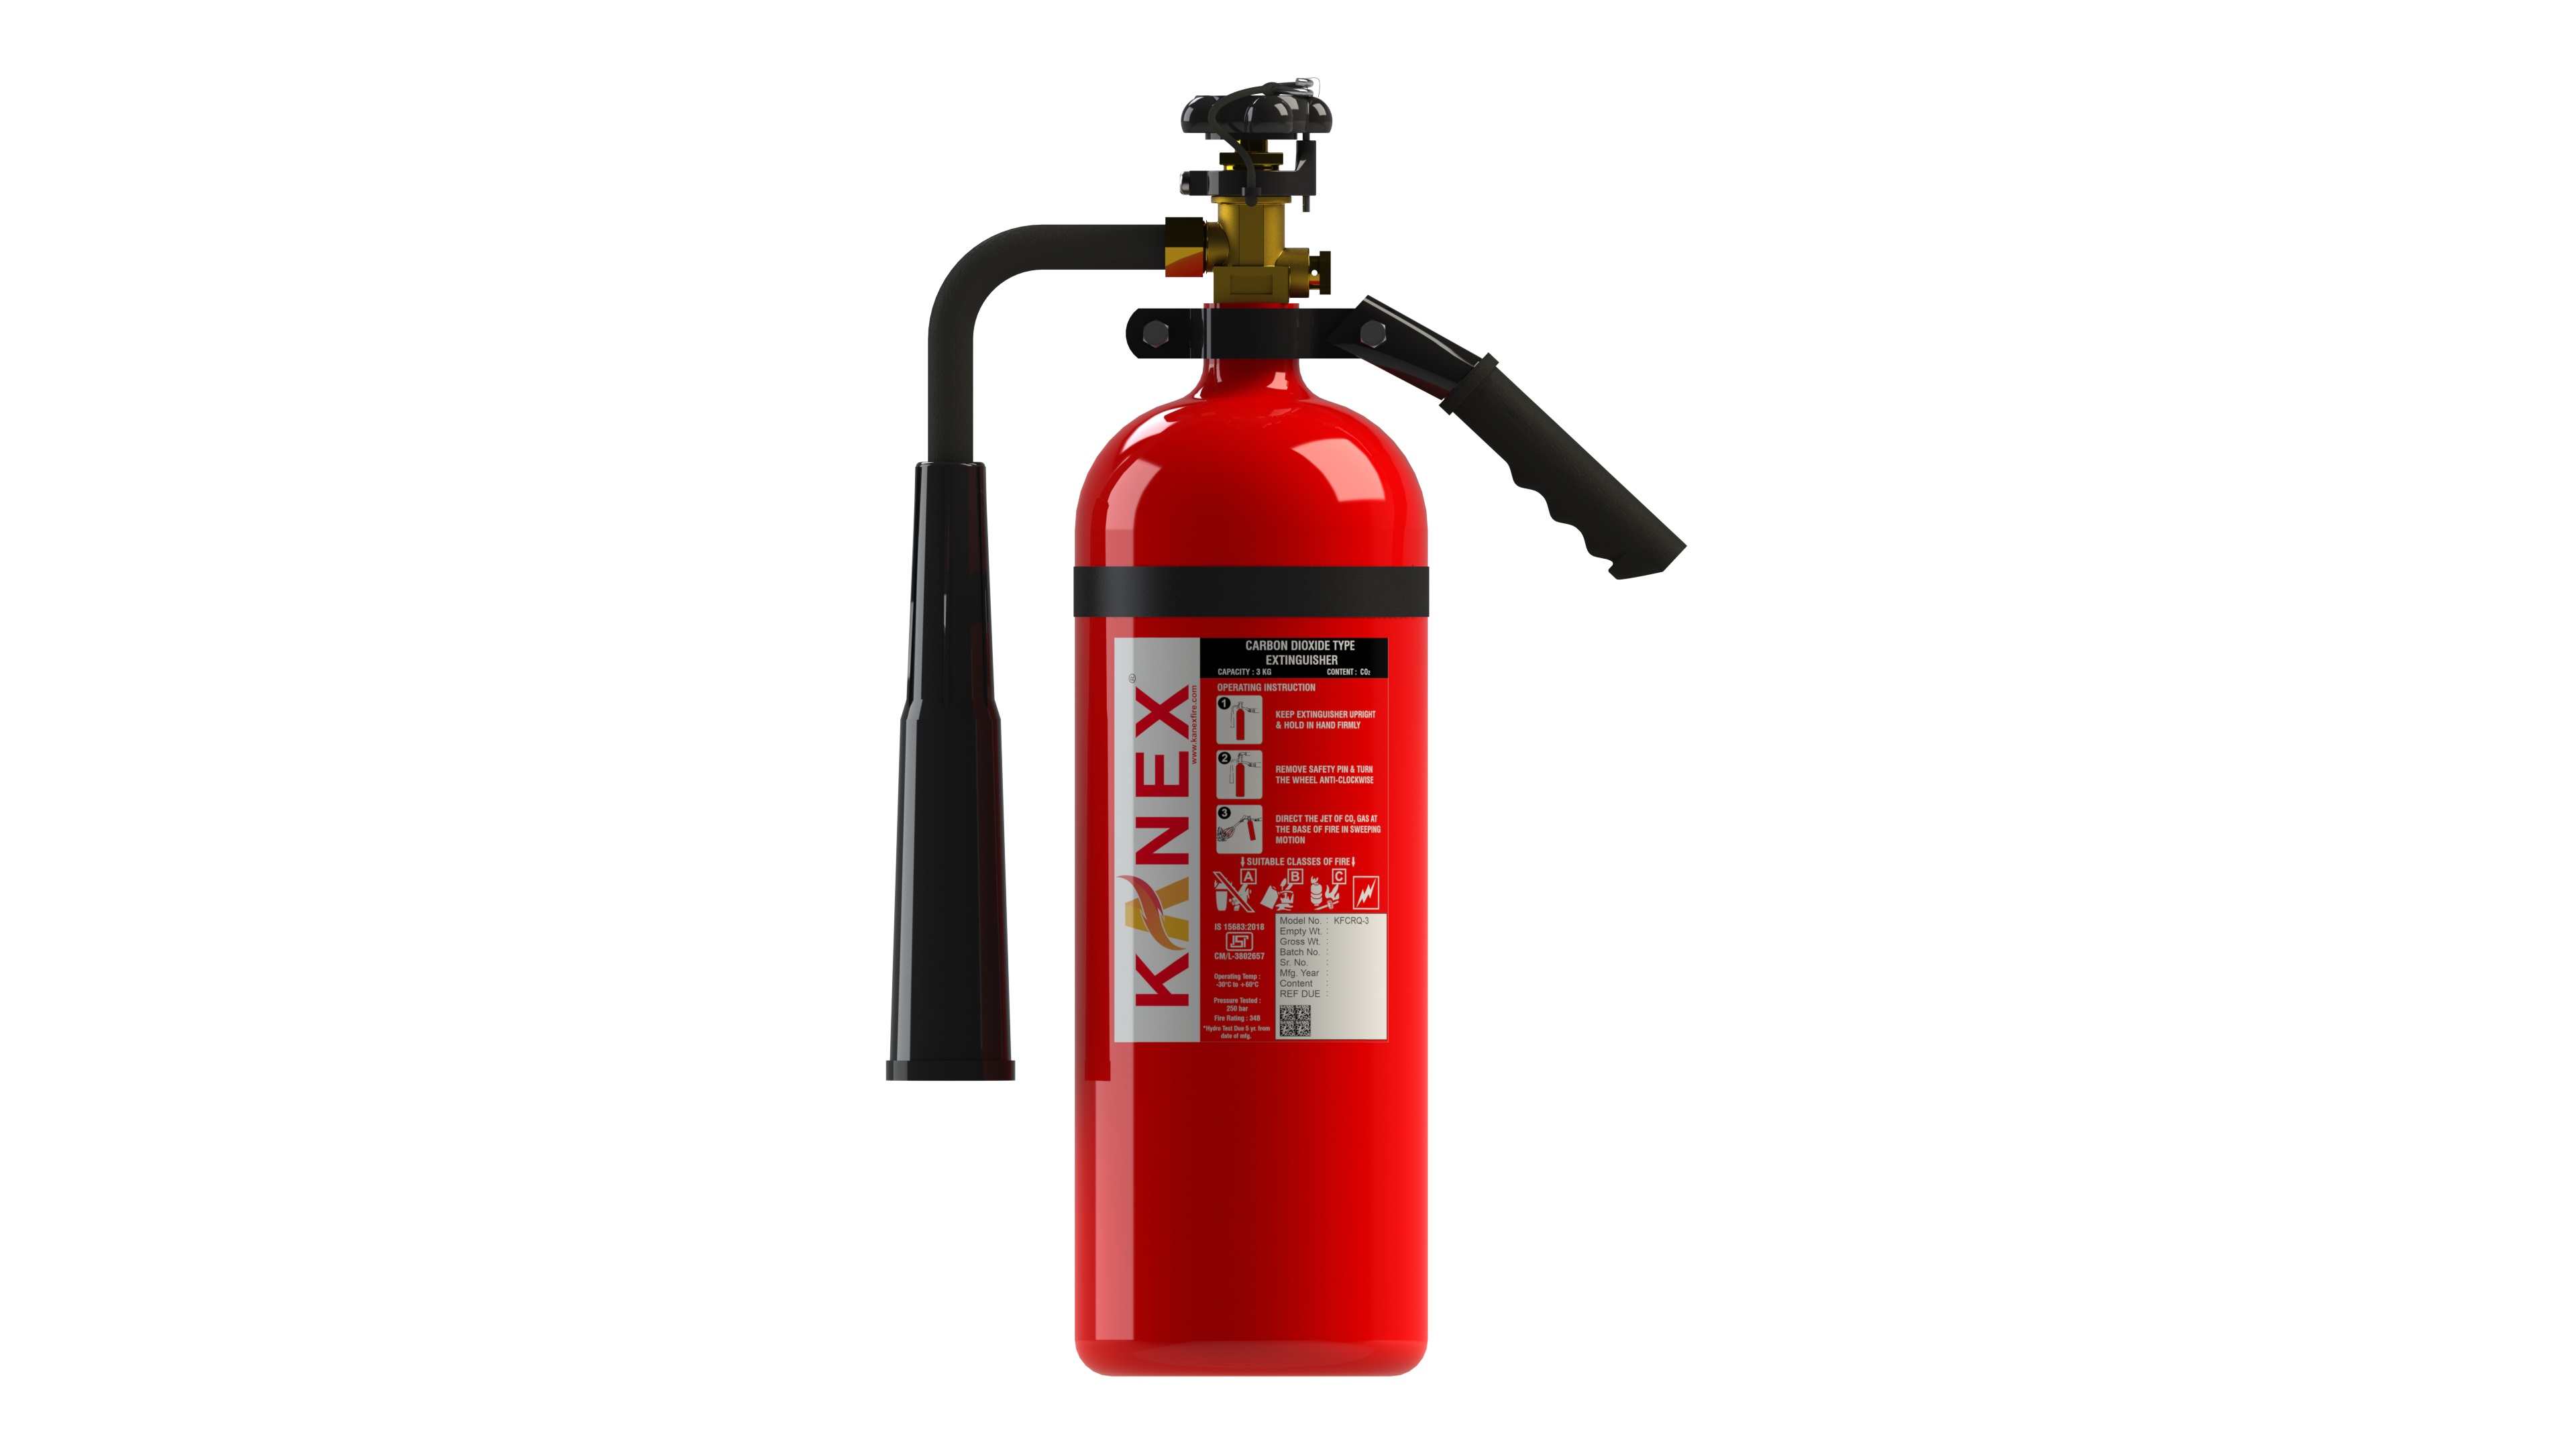 Buy KANEX 3 kg CO2 (Black) Fire Extinguishers online at best rates in India